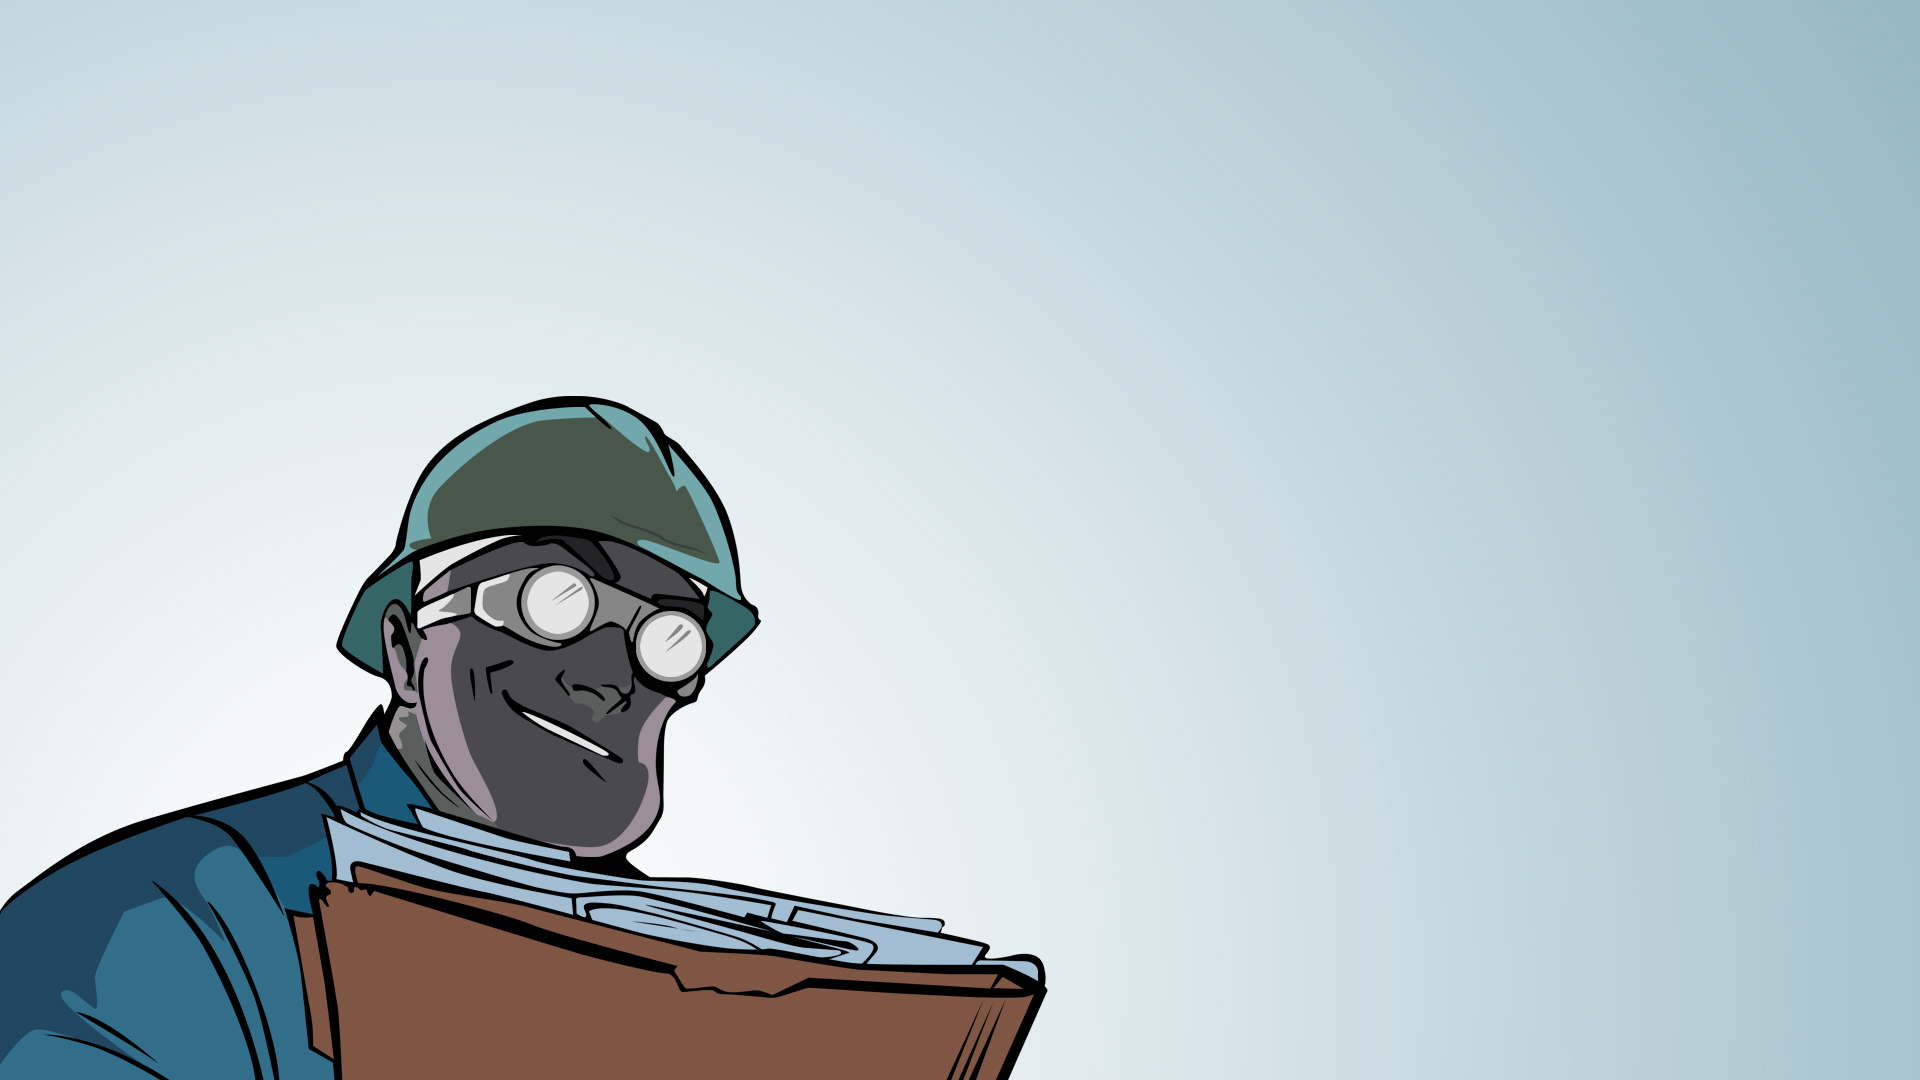 Engineer (character), Team Fortress 2 Wallpaper